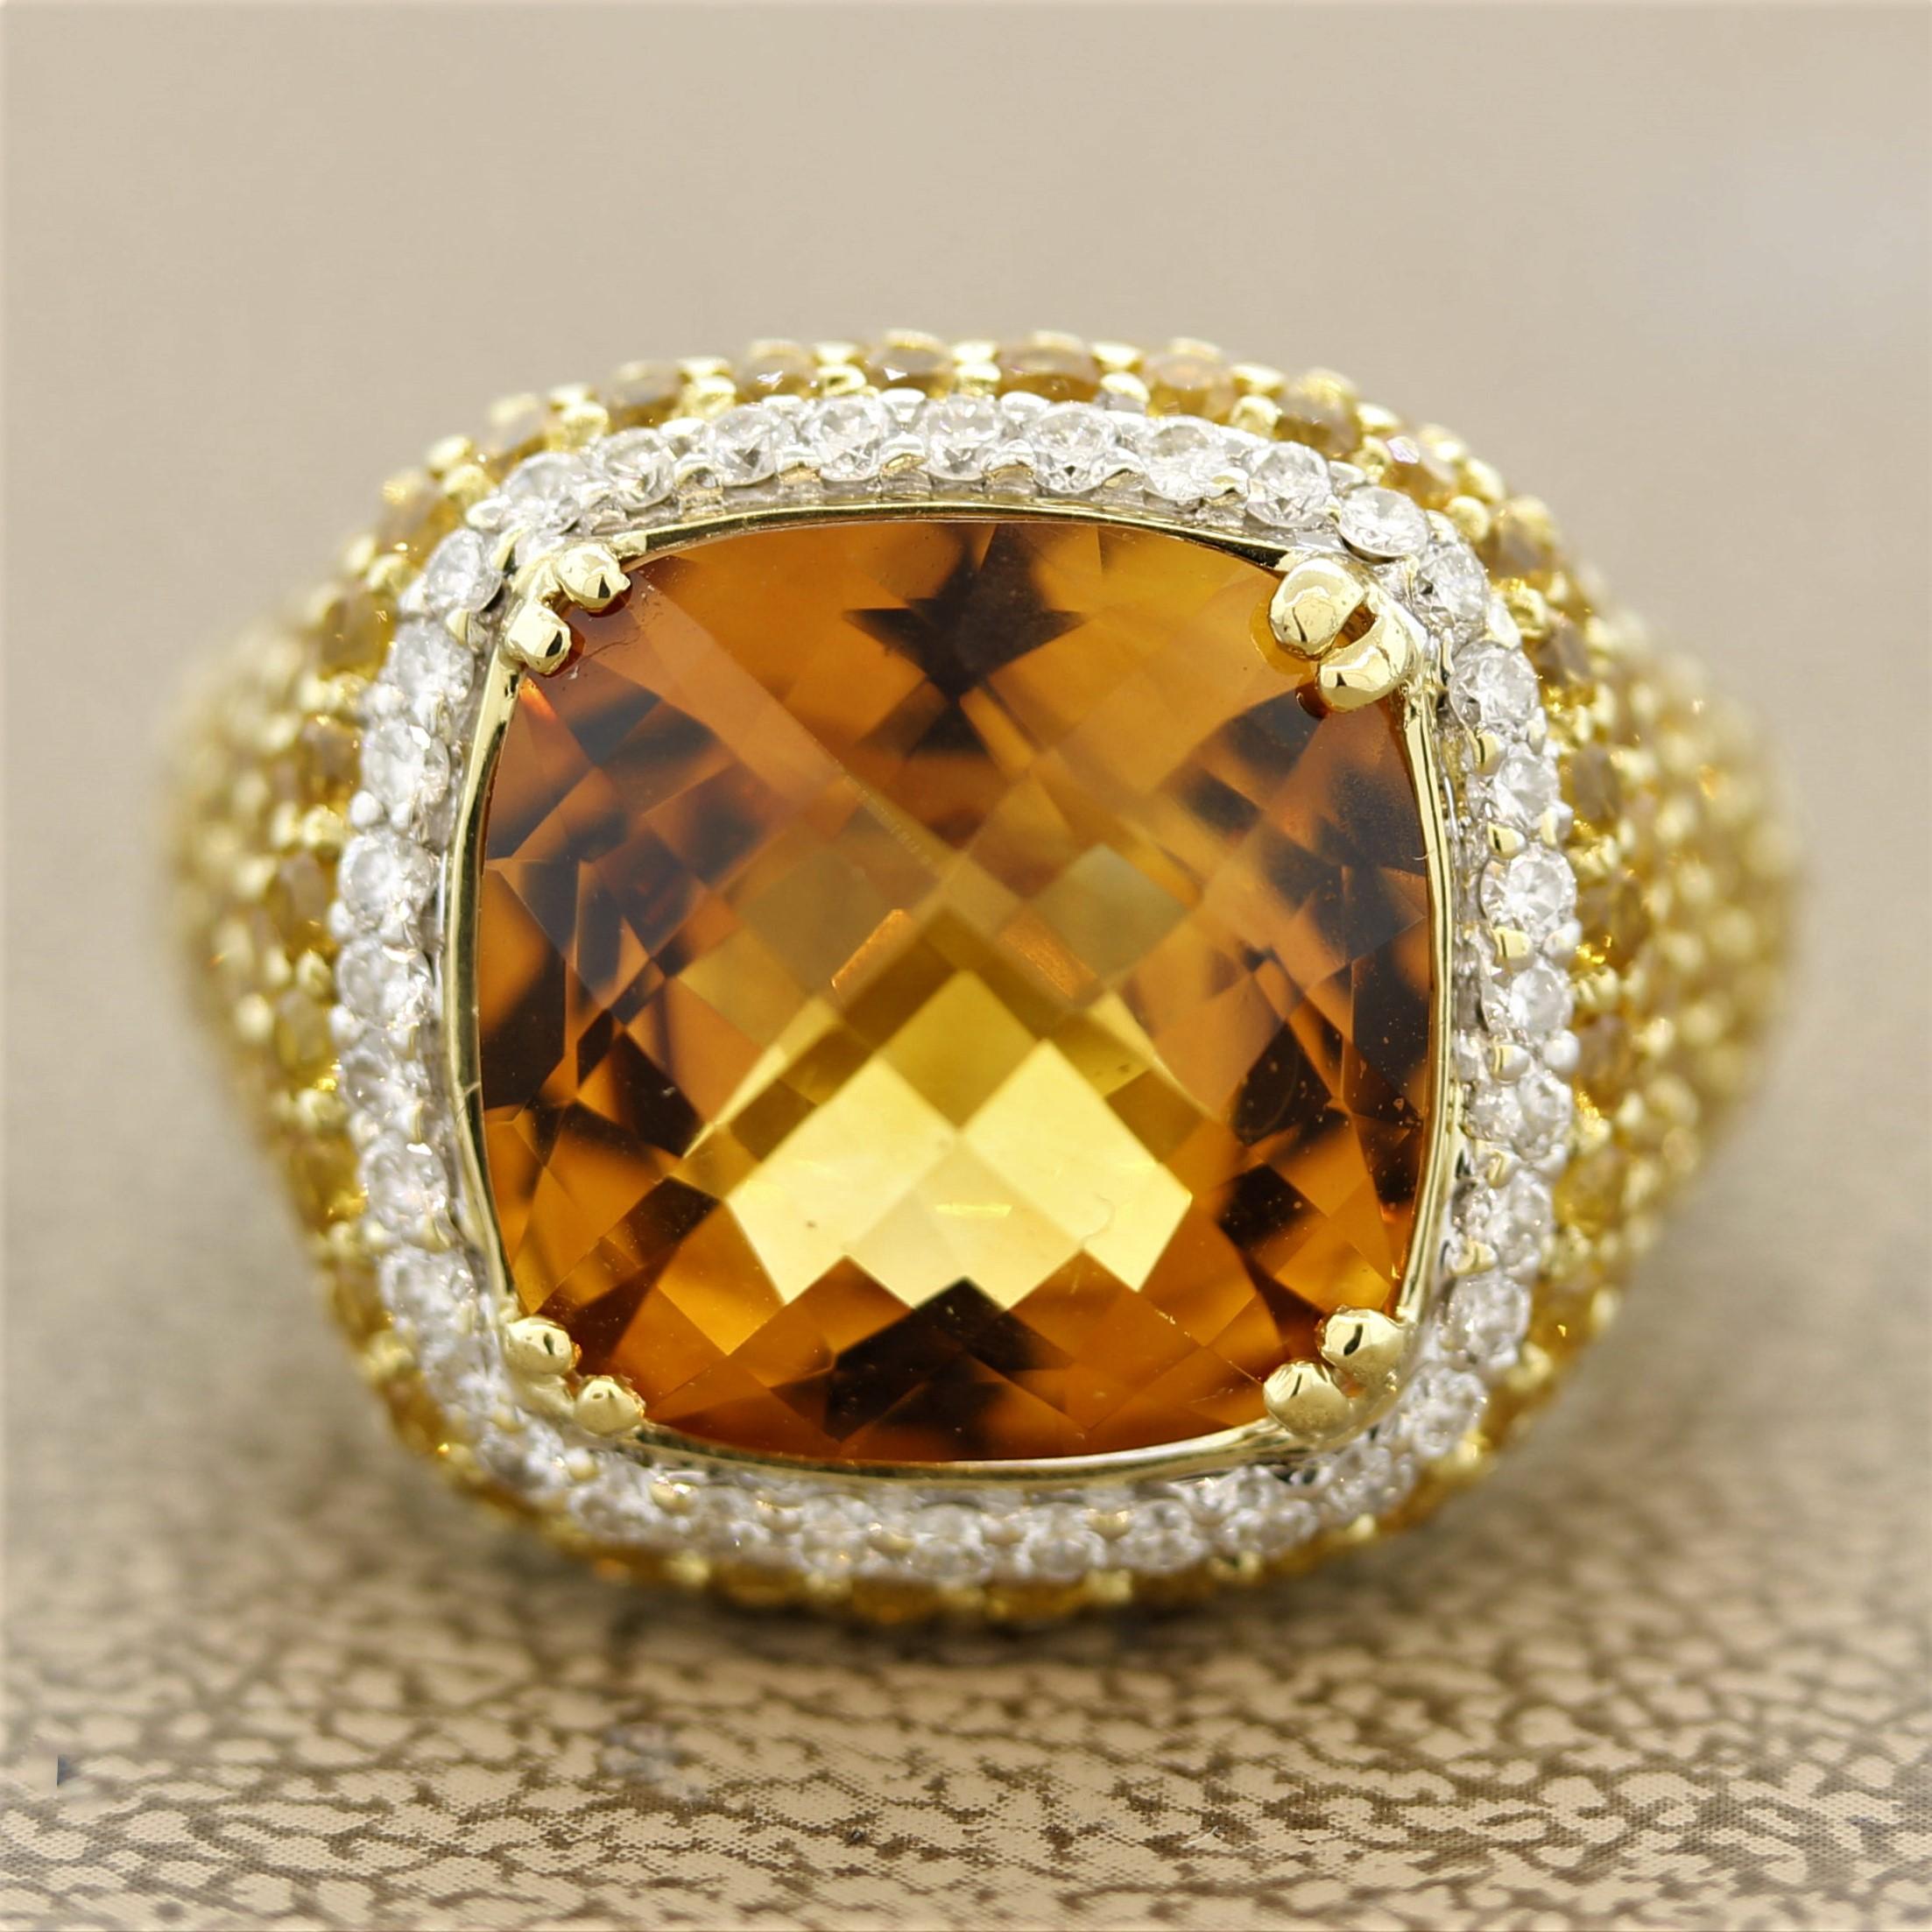 A stylish ring featuring a checker-cut domed citrine weighing 9.30 carats. It has a rich and vibrant golden orange color and is haloed by 0.32 carats of round brilliant cut diamonds. There are 3.12 carats of round cut yellow sapphires which are set